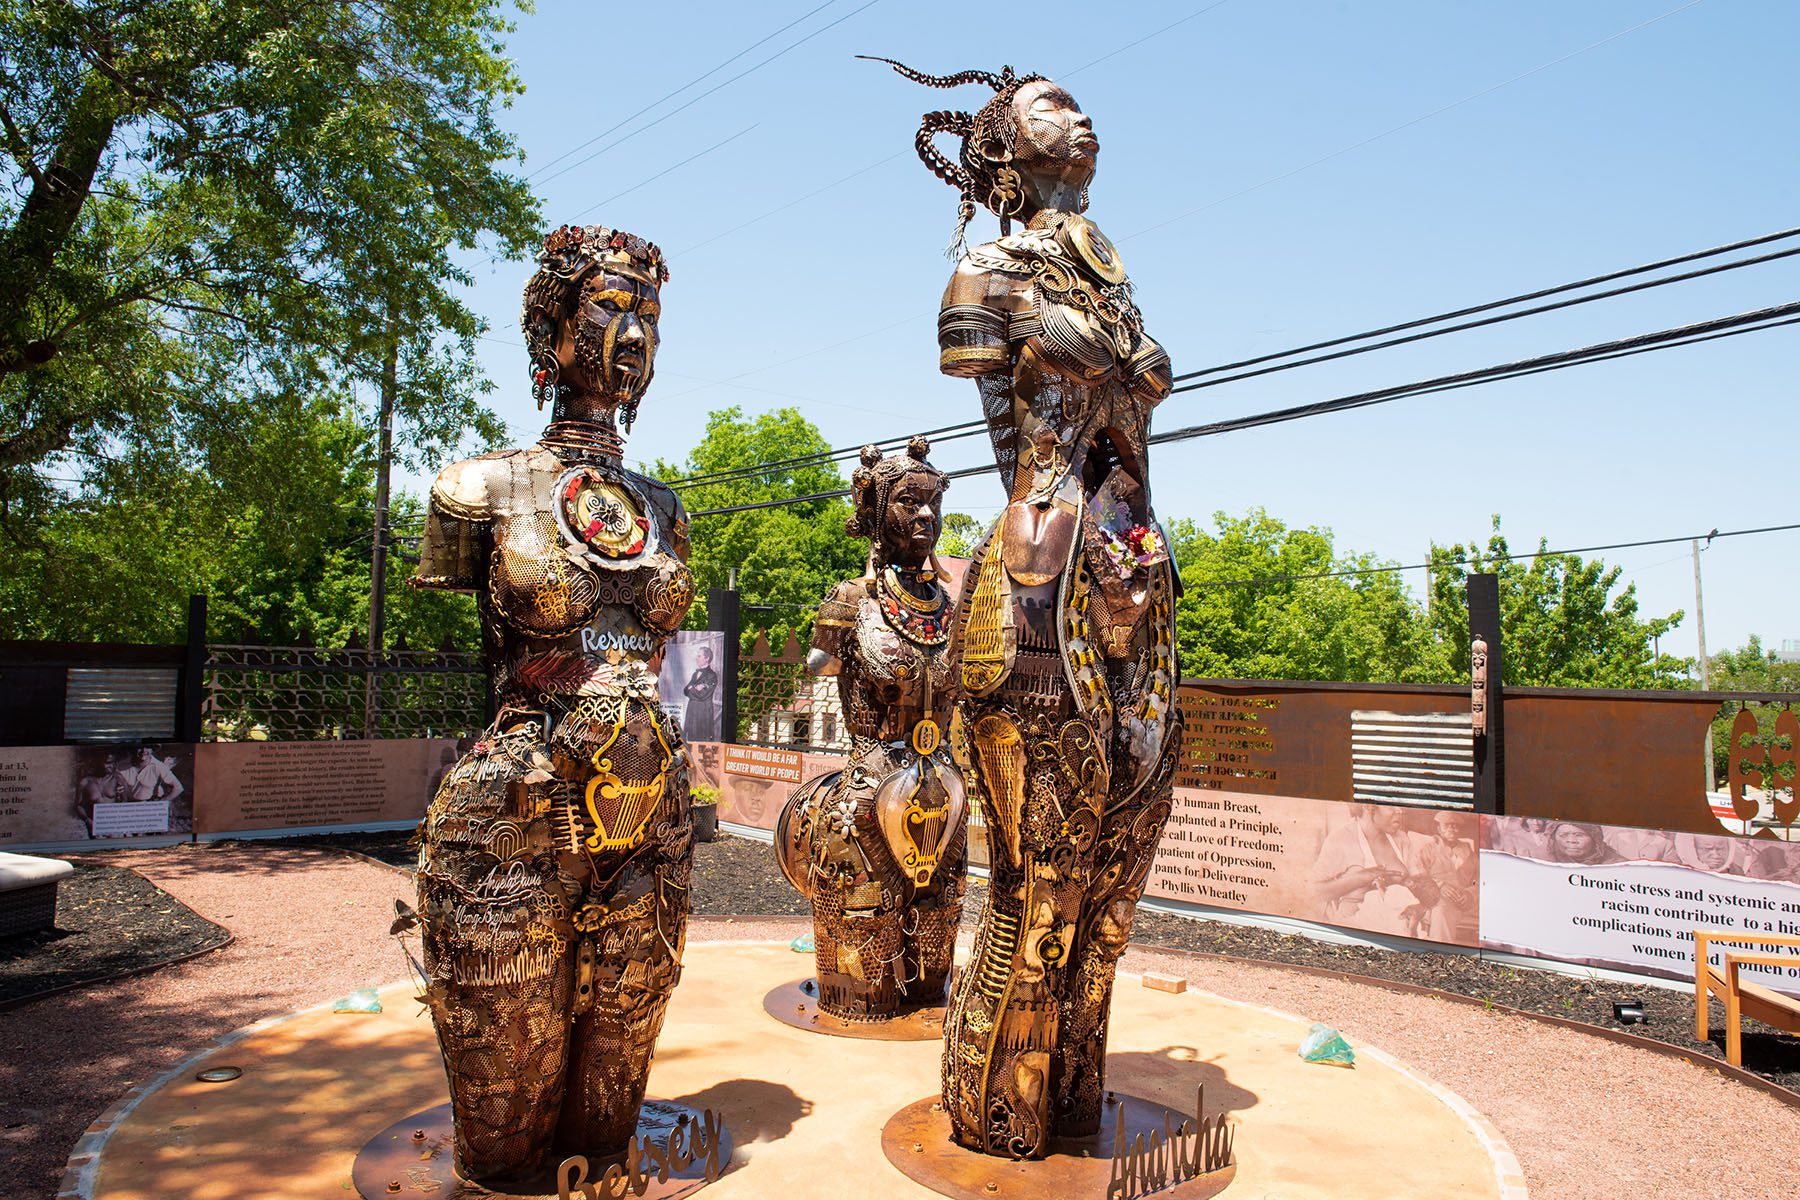 The Mothers of Gynecology Monument in Montgomery, Alabama.